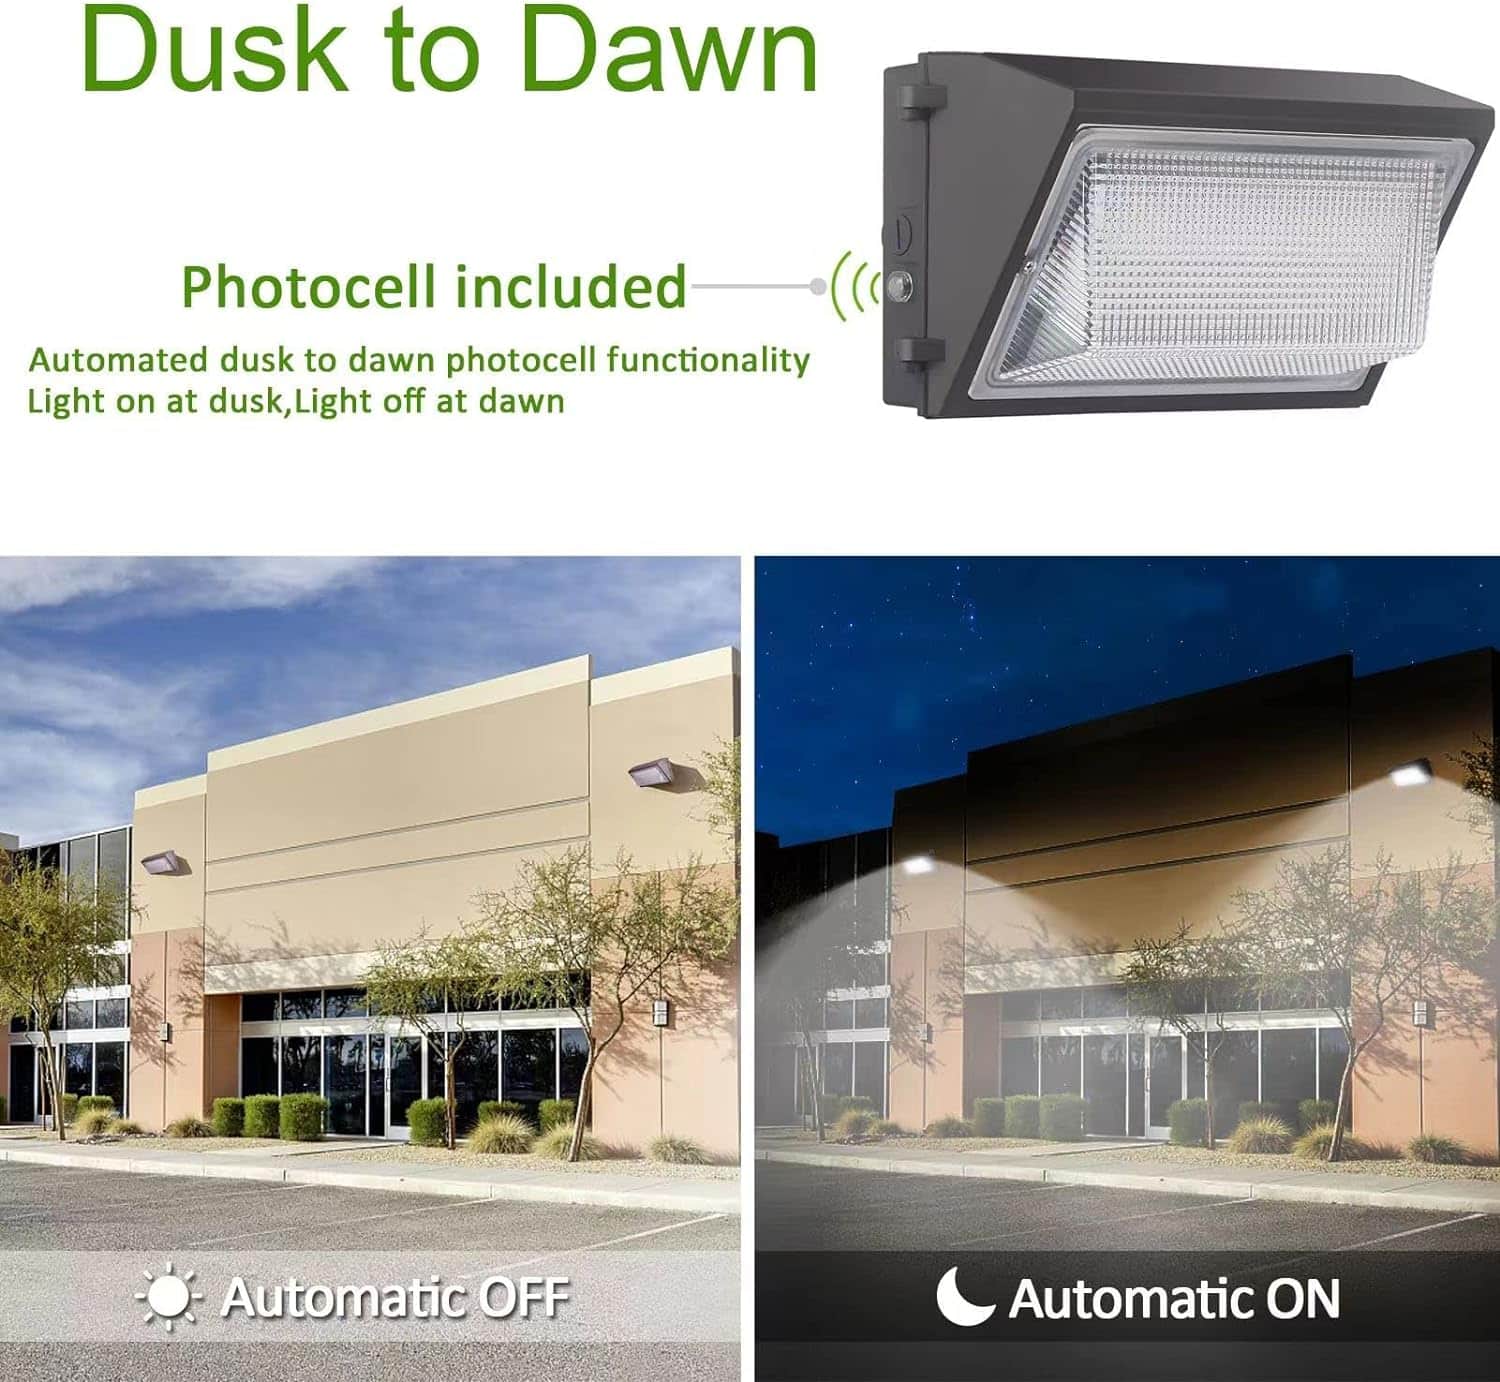 Paktonvo 100W LED Wall Pack Dusk to Dawn, 13000Lm 5000K Daylight Commercial Security Lighting,400-600W MH Equivalent, 100-277V,ETL Certified Outdoor LED Wall Pack Light for Parking Lot Doorway House